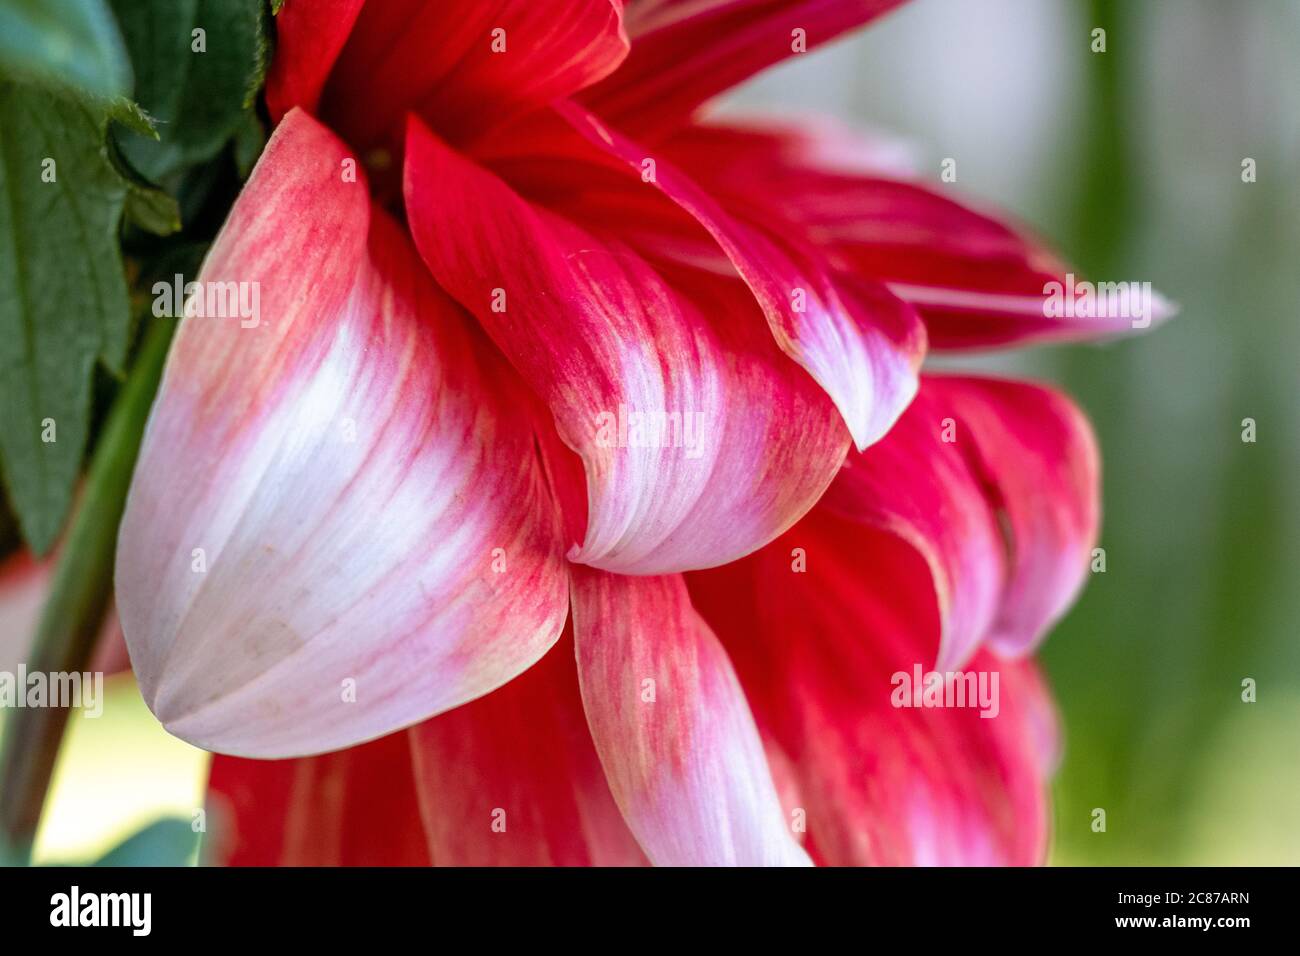 Decorative red large dahlia flower patals close up over blur background Stock Photo